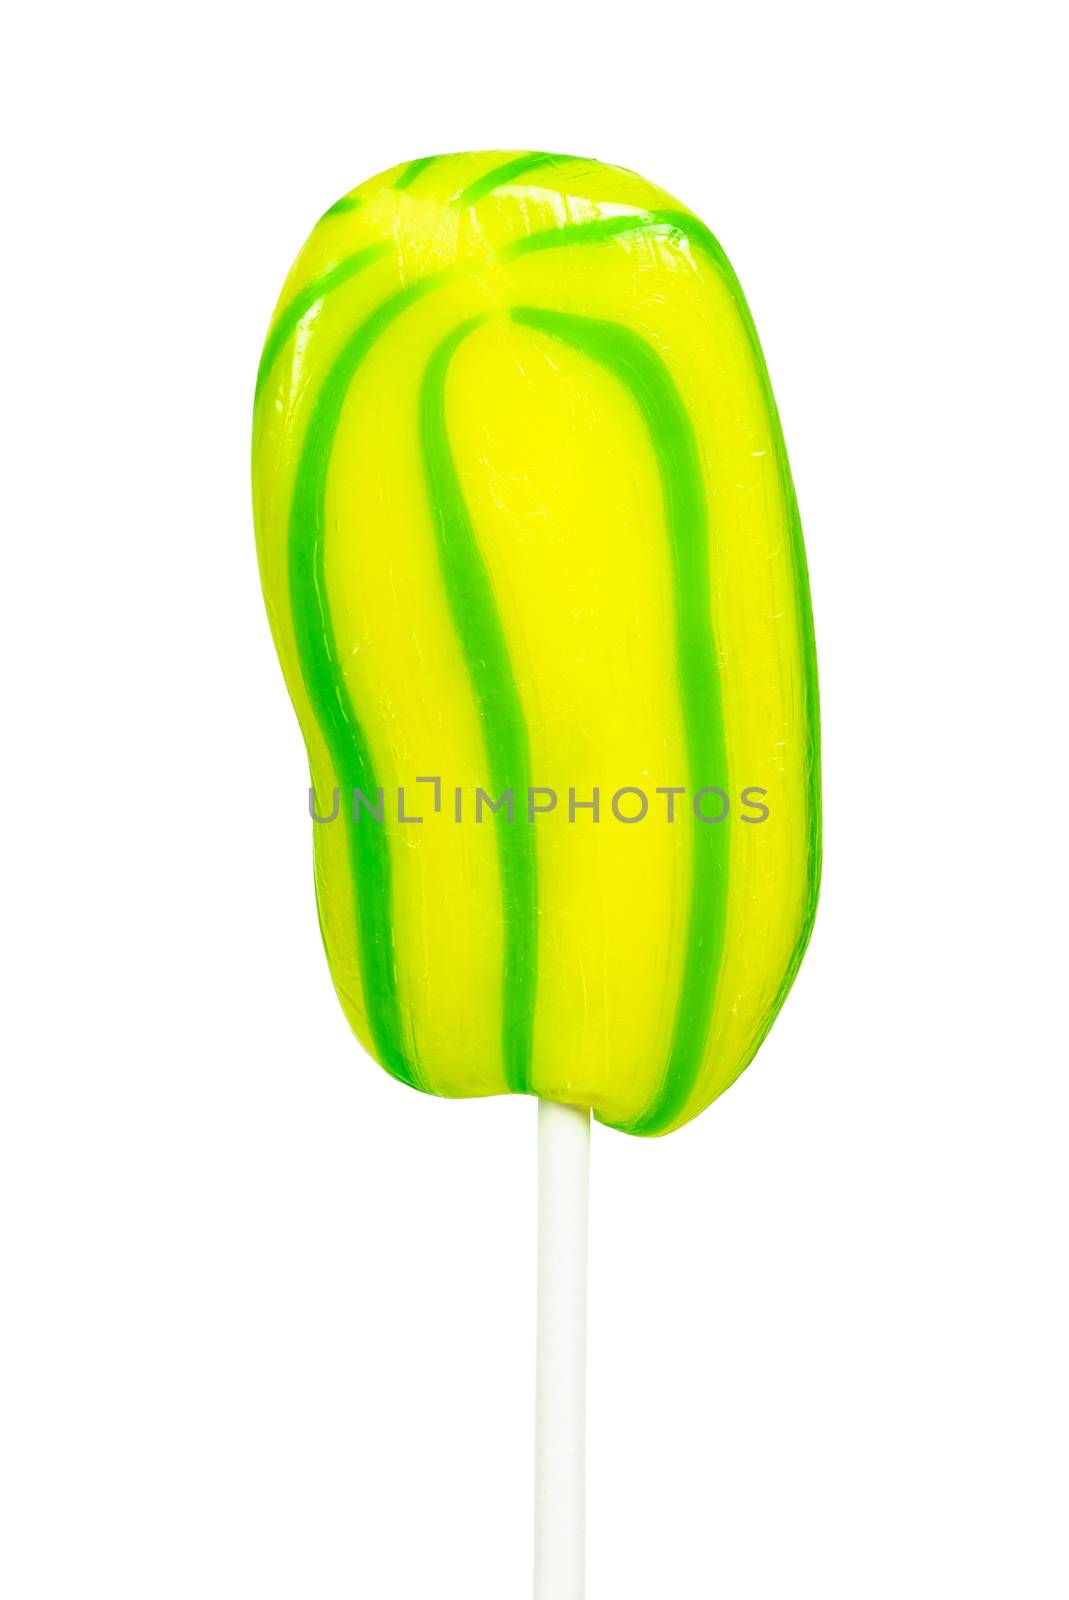 Yellow-green lollipop isolated on white background with clipping path